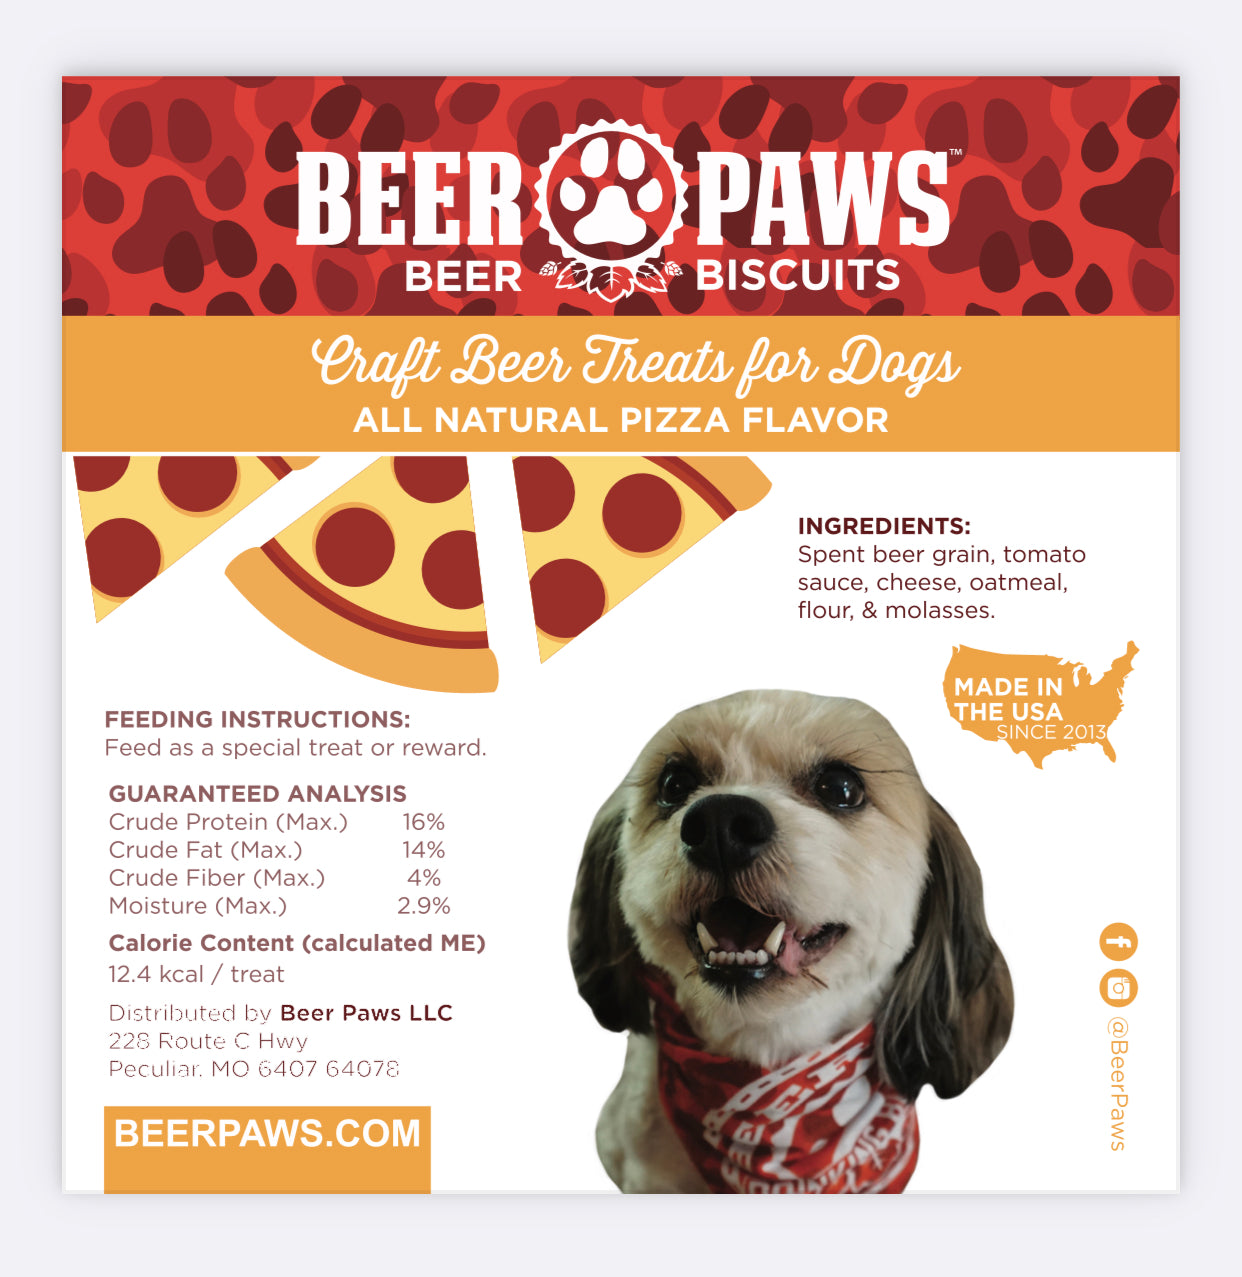 Beer Paws Pizza Beer Biscuits for Dogs